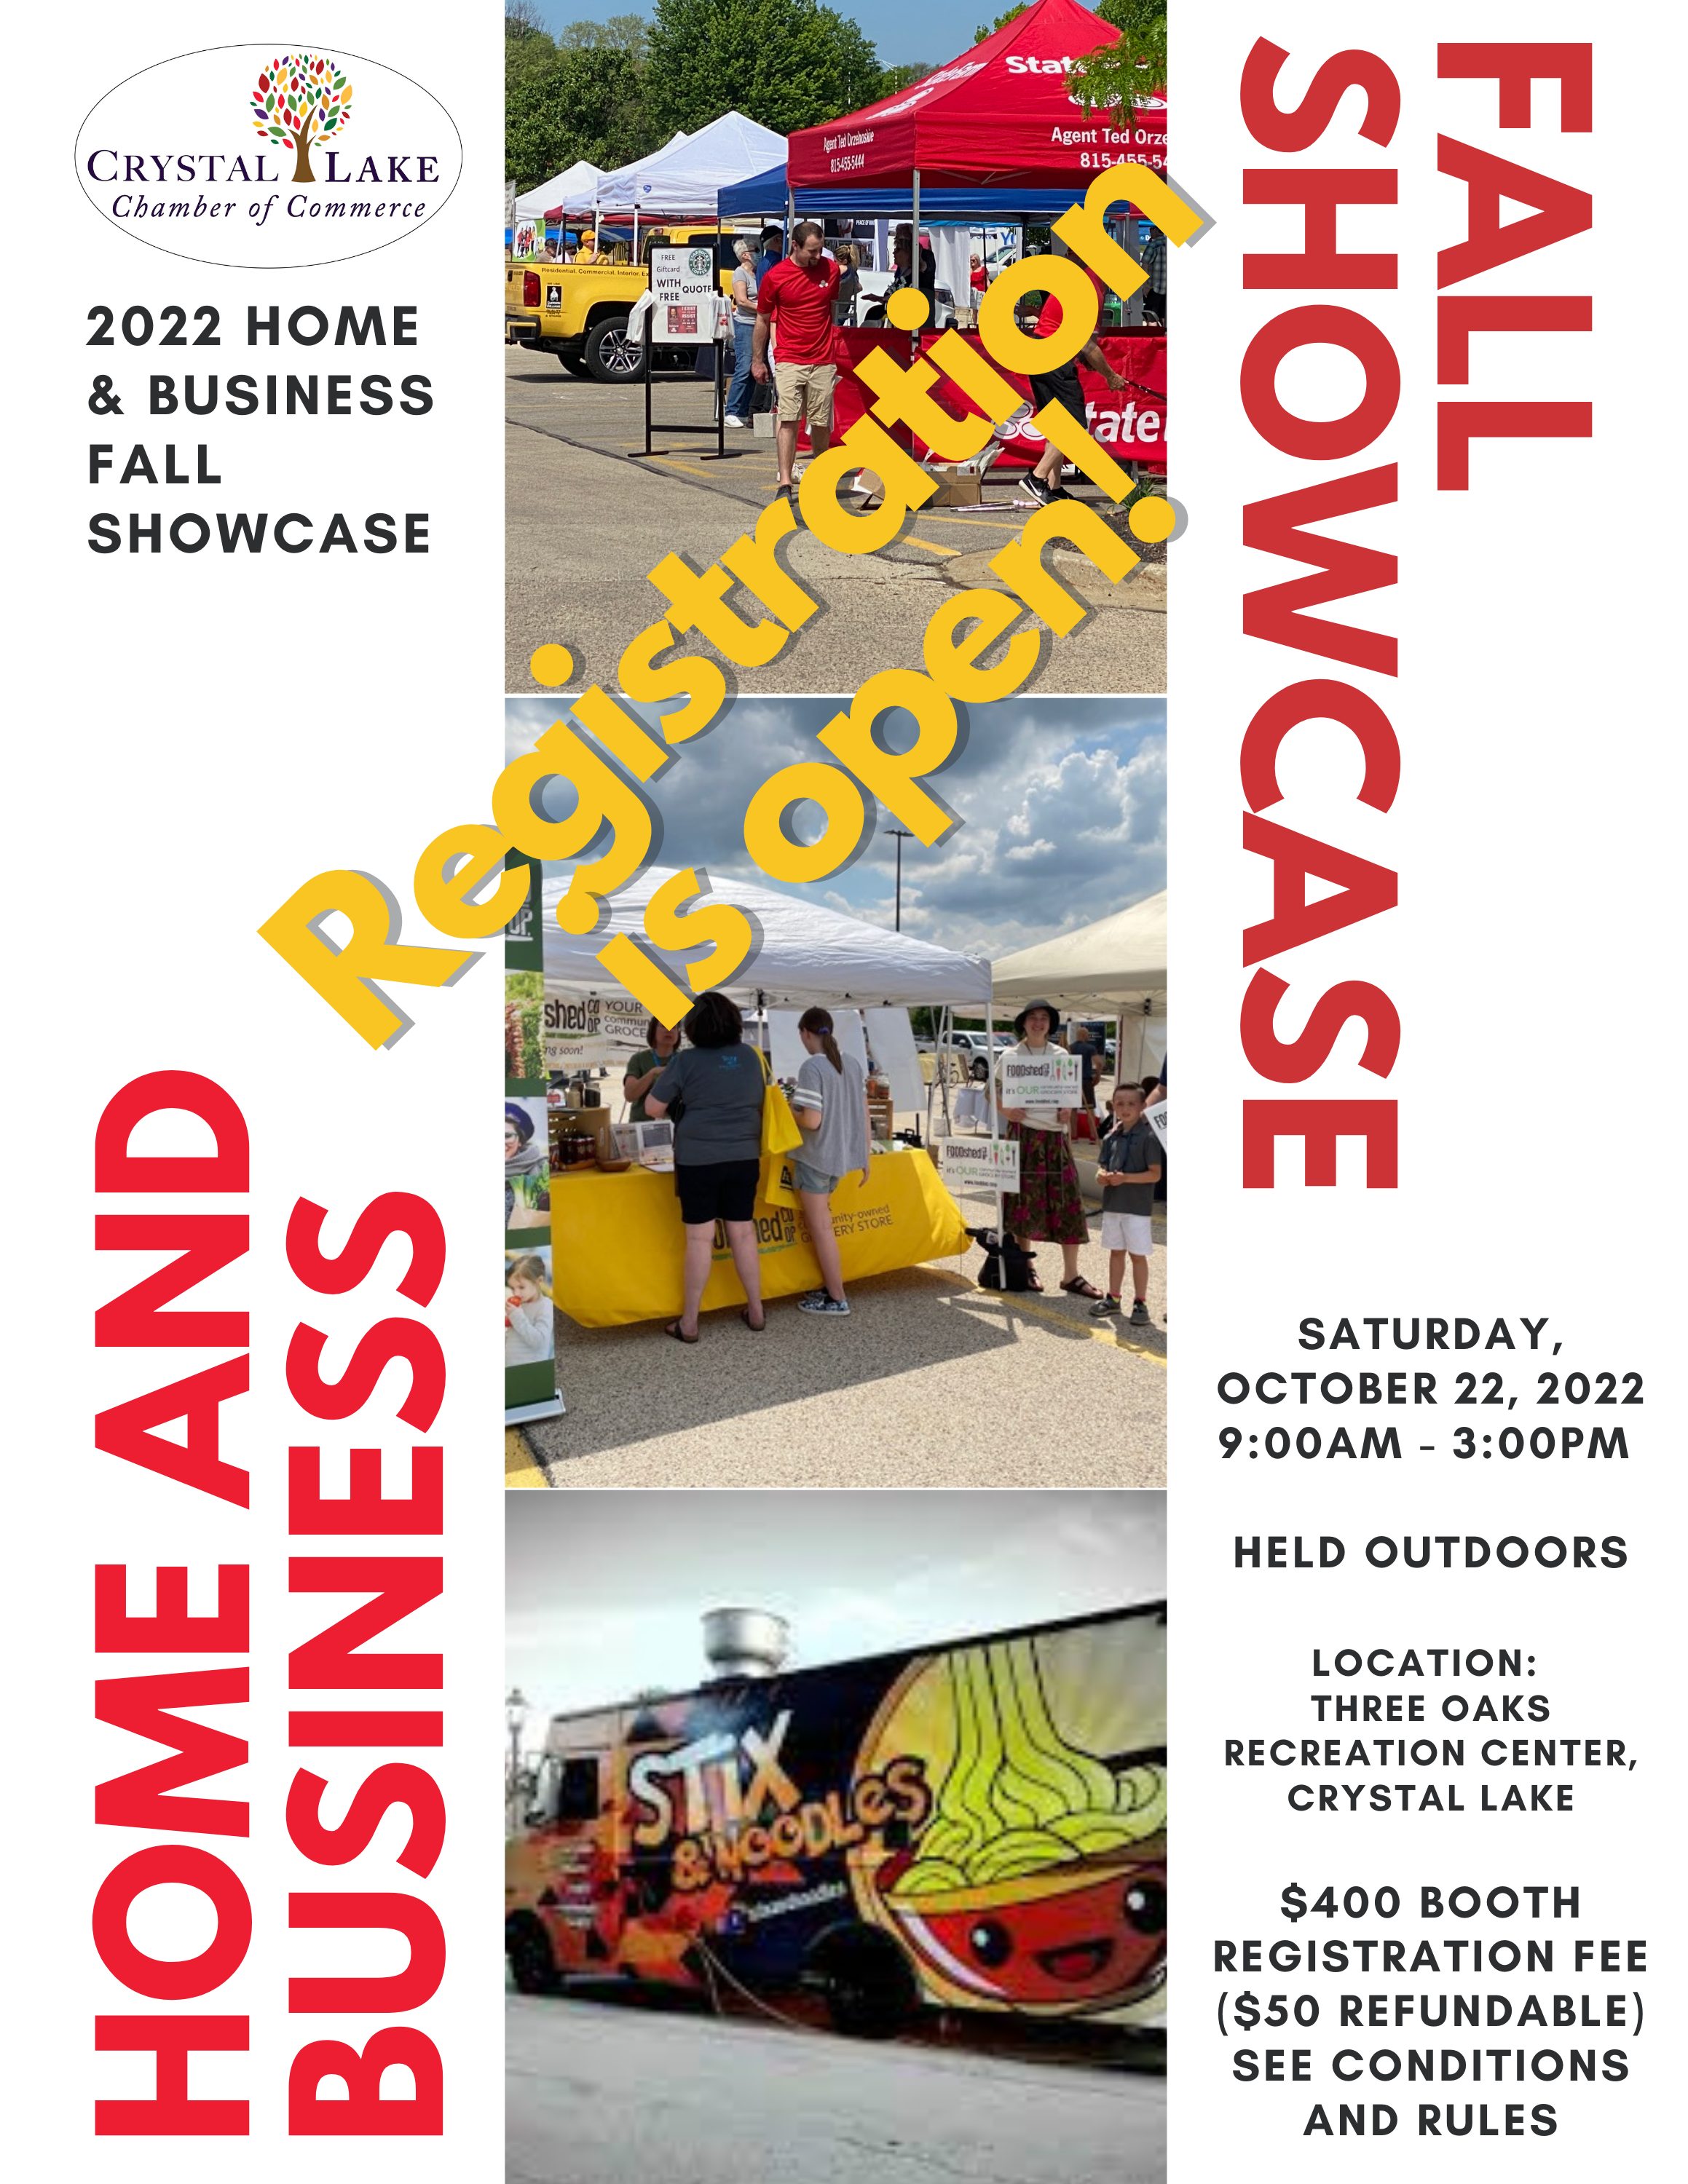 2022 home and business fall showcase flyer